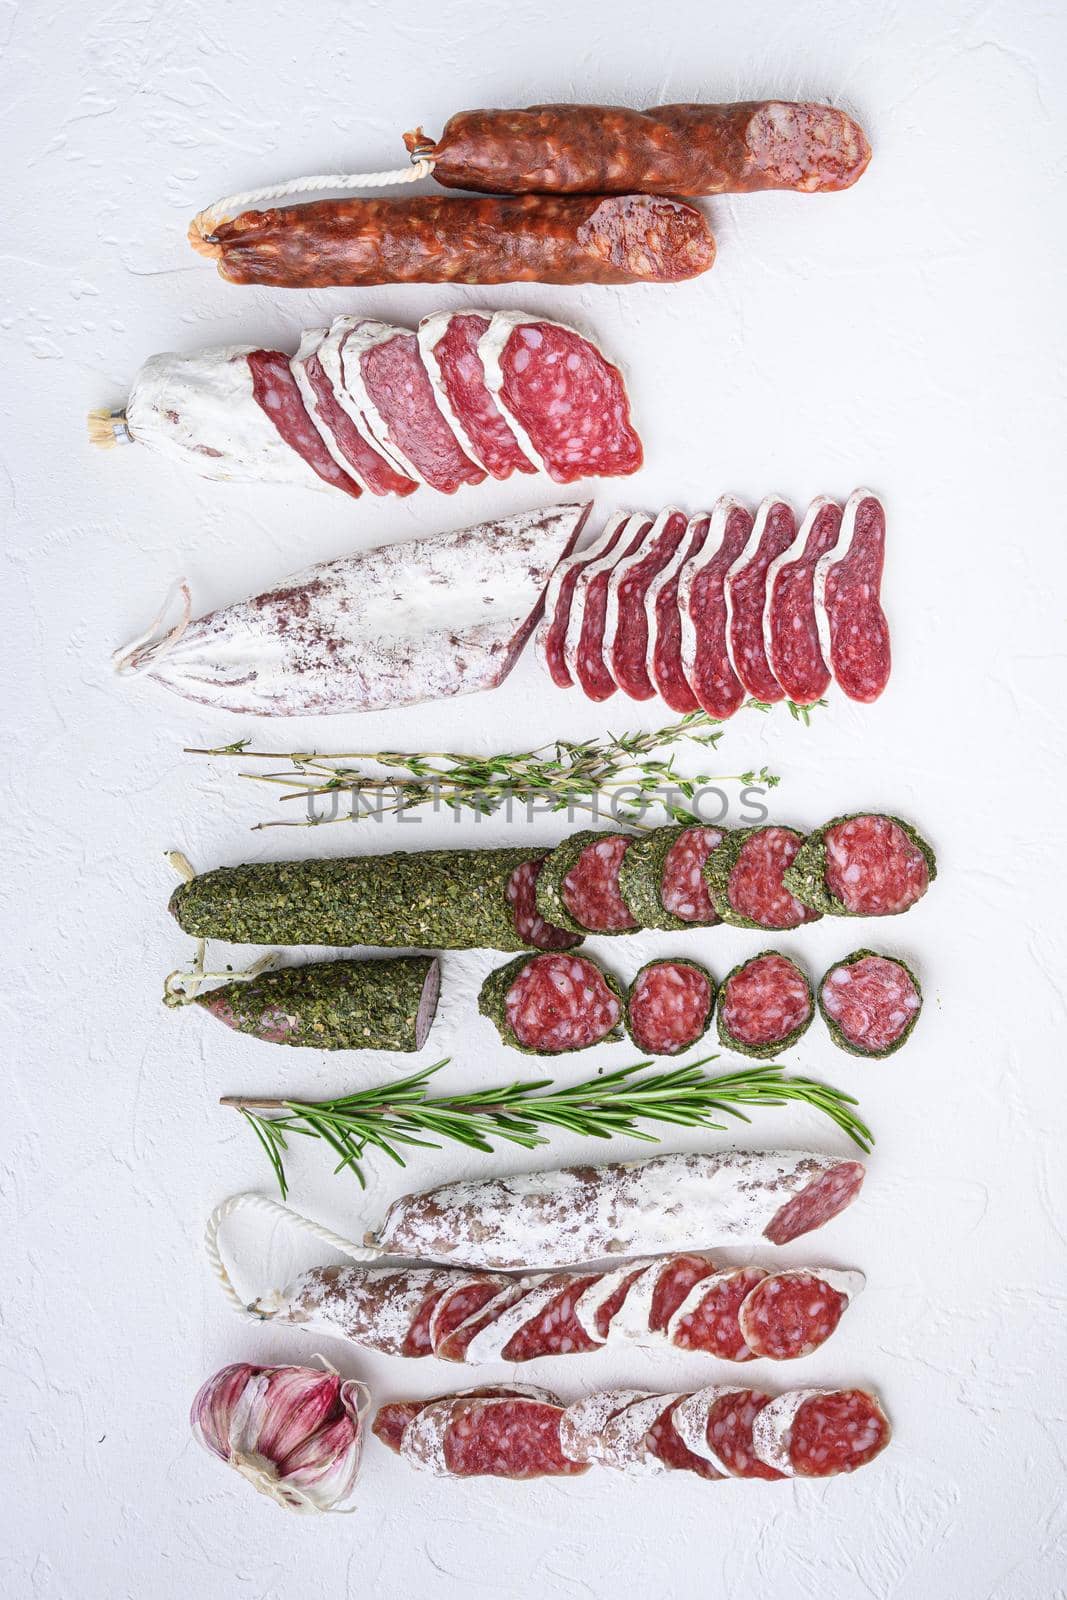 Variety of dry cured fuet and chorizosalami sausages, whole and sliced on white textured background, topview.